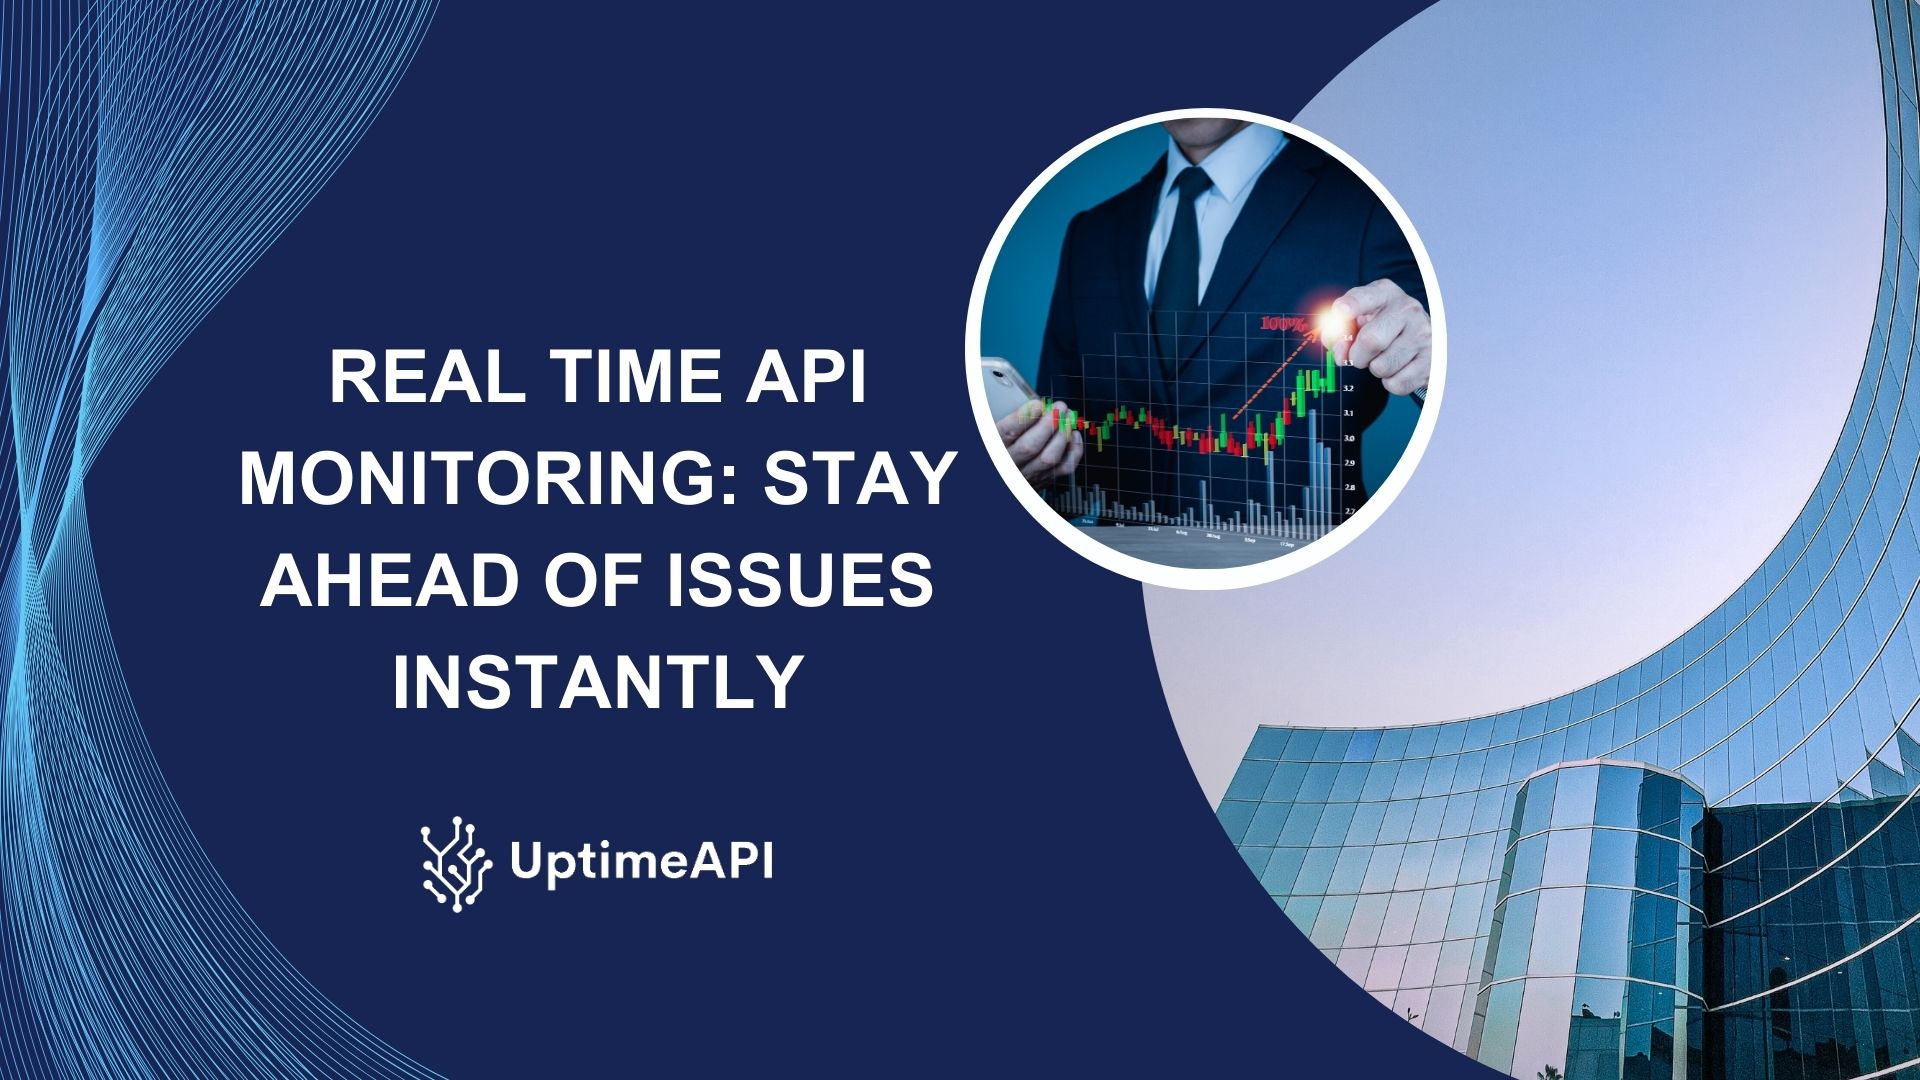 Real Time API Monitoring: Stay Ahead Of Issues Instantly